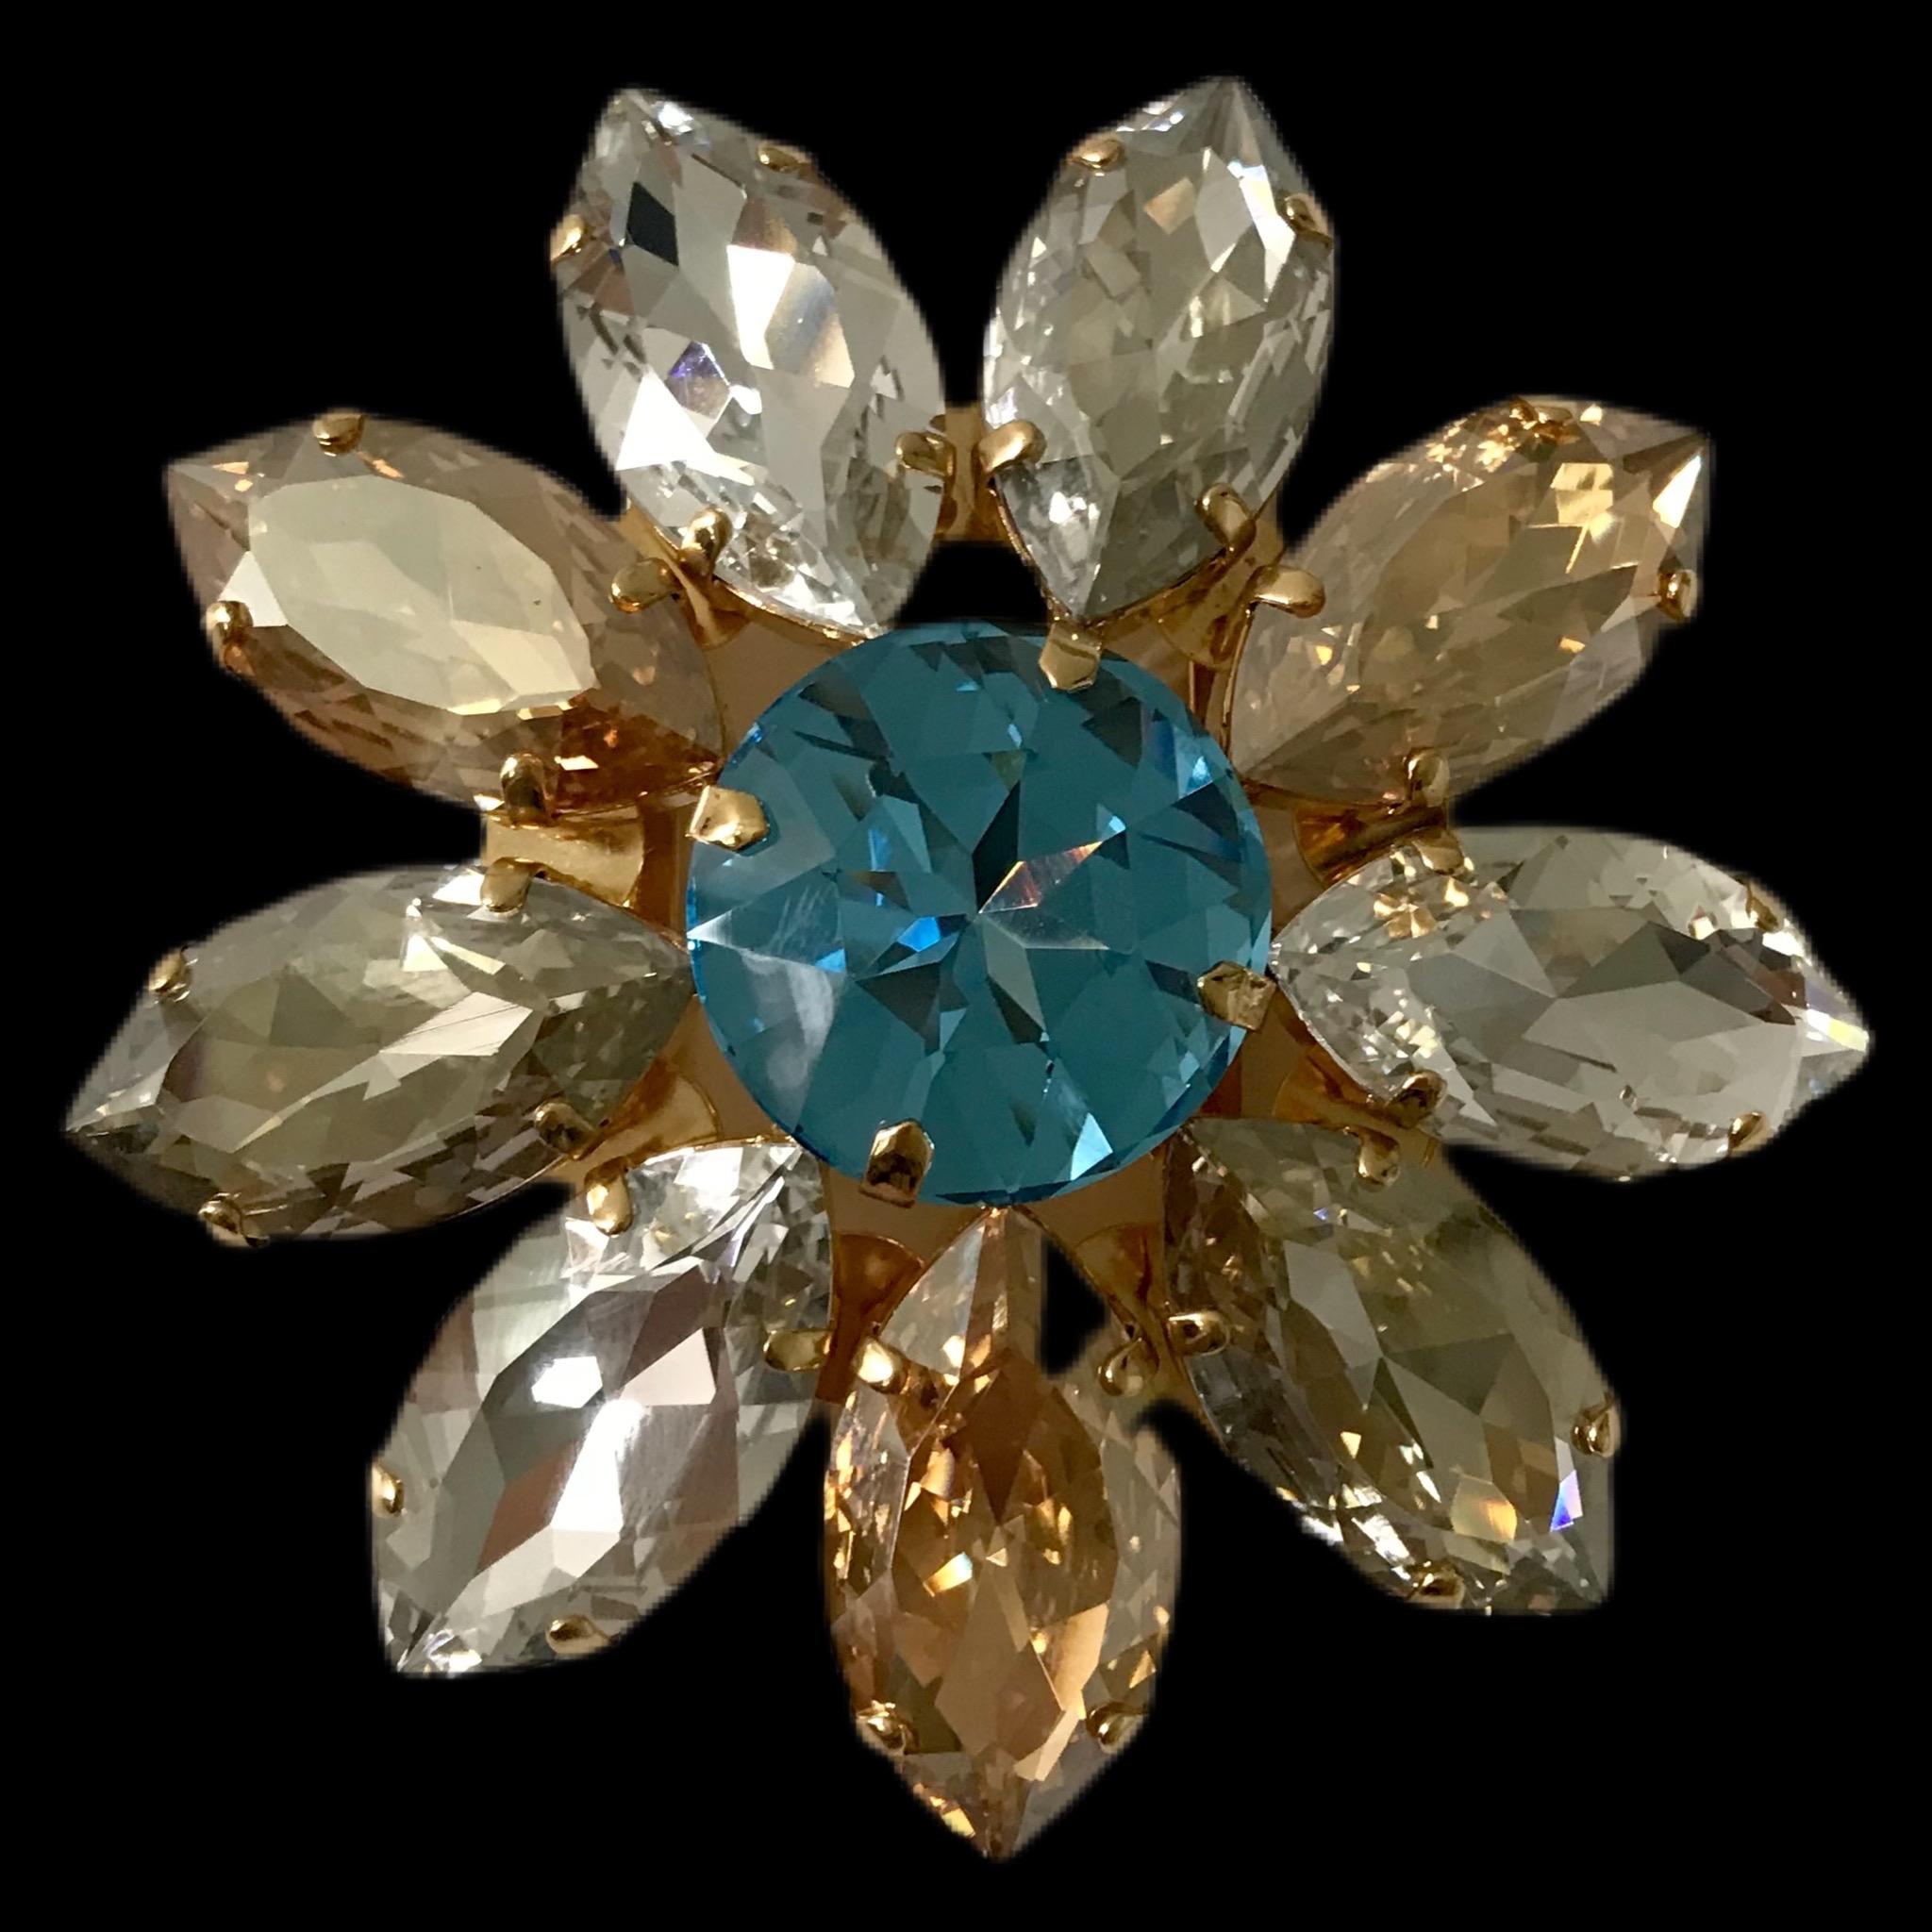 The Pelush blue and amber Swarowsky crystal flower brooch is a one of a kind exclusive piece. Made for Pelush by Florentine artisans in Italy, this striking statement jewelry can be utilized in many different ways. The modern daisy design features a